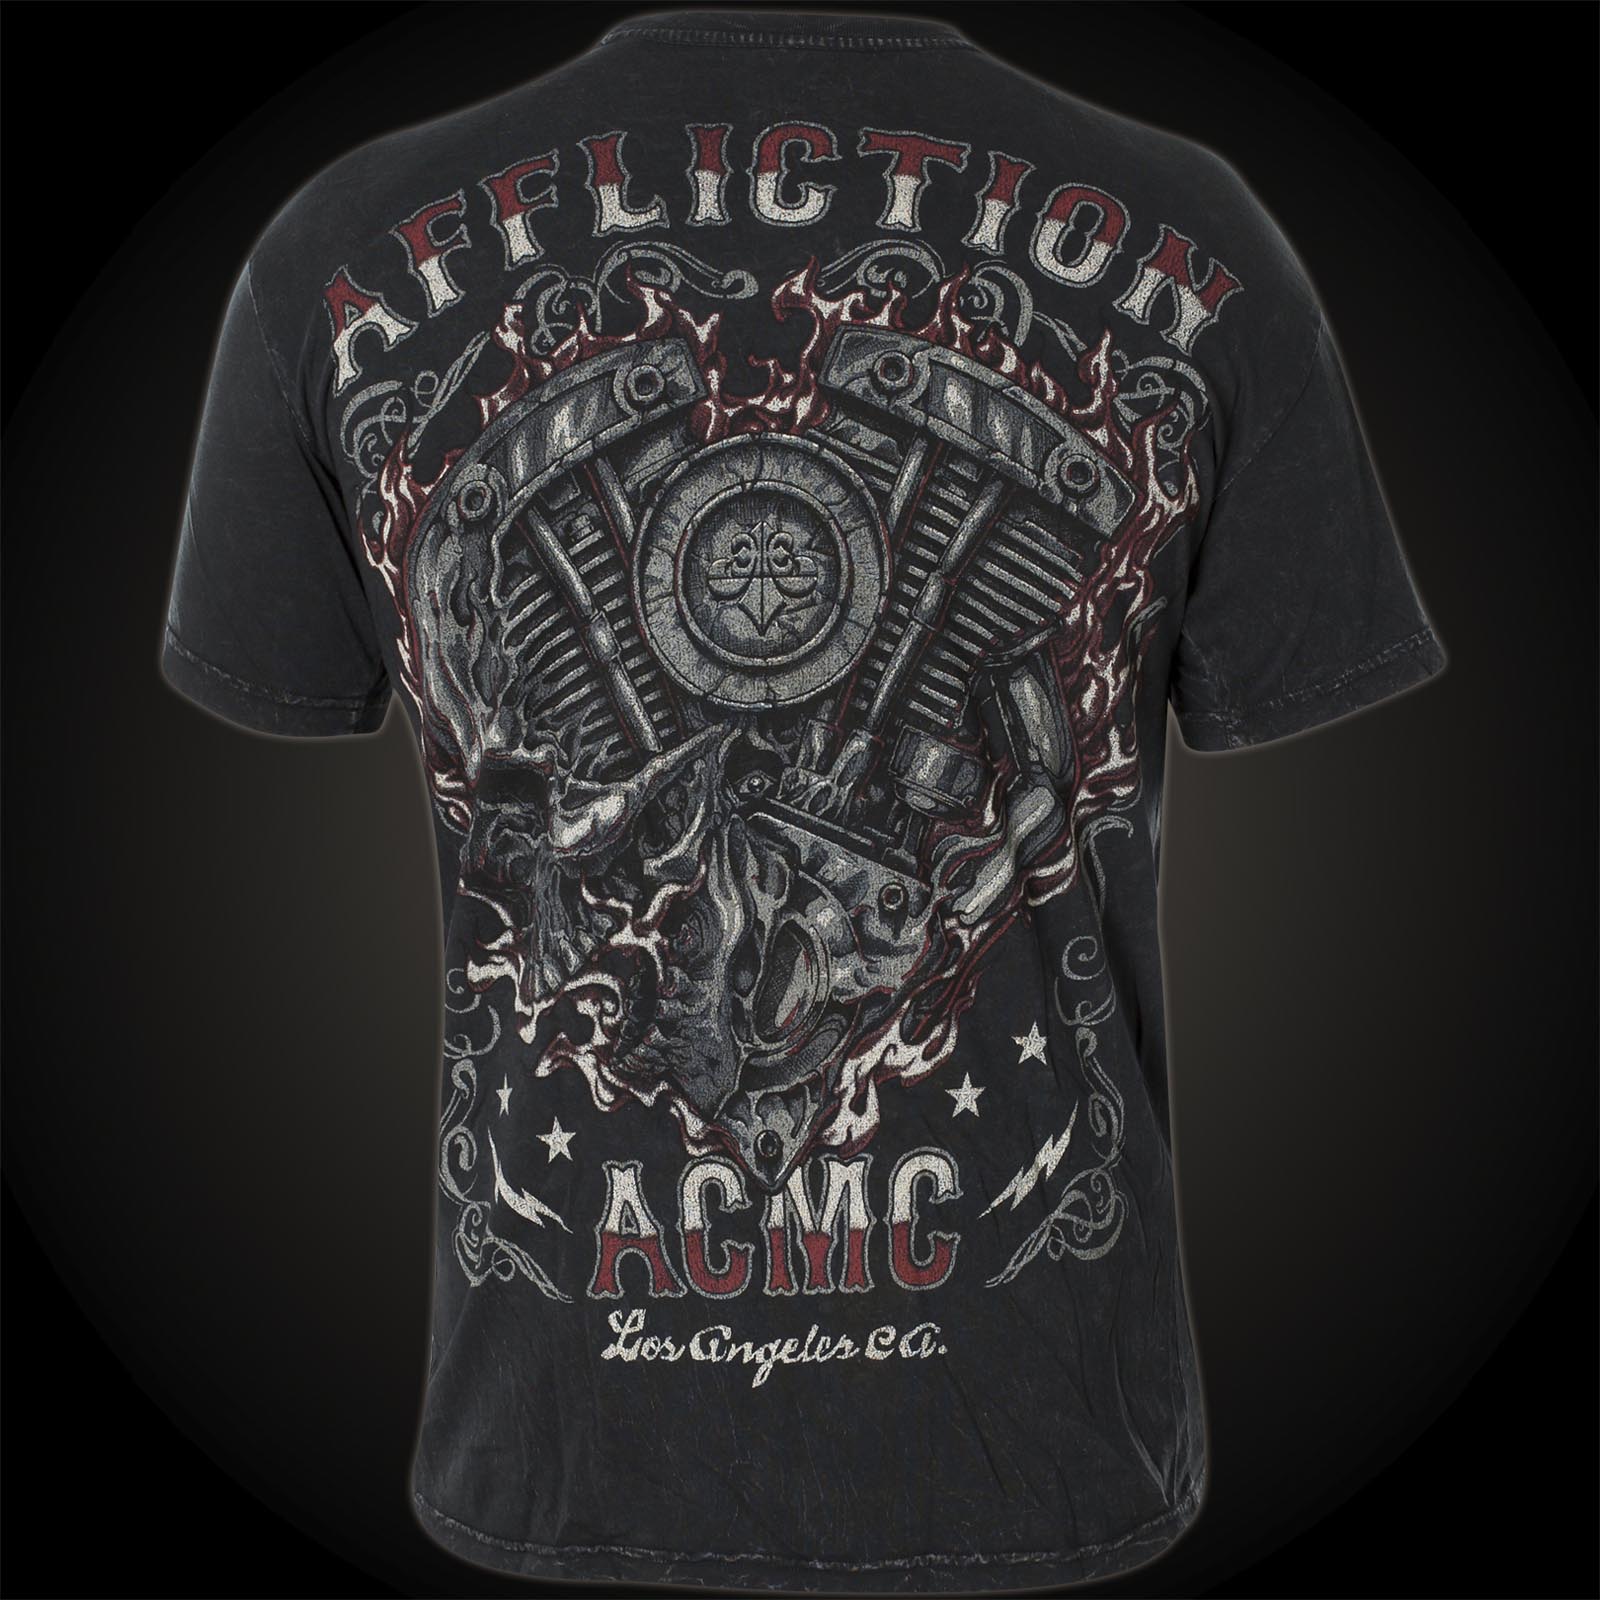 Affliction AC Native Horsepower featuring a skull and an engine block